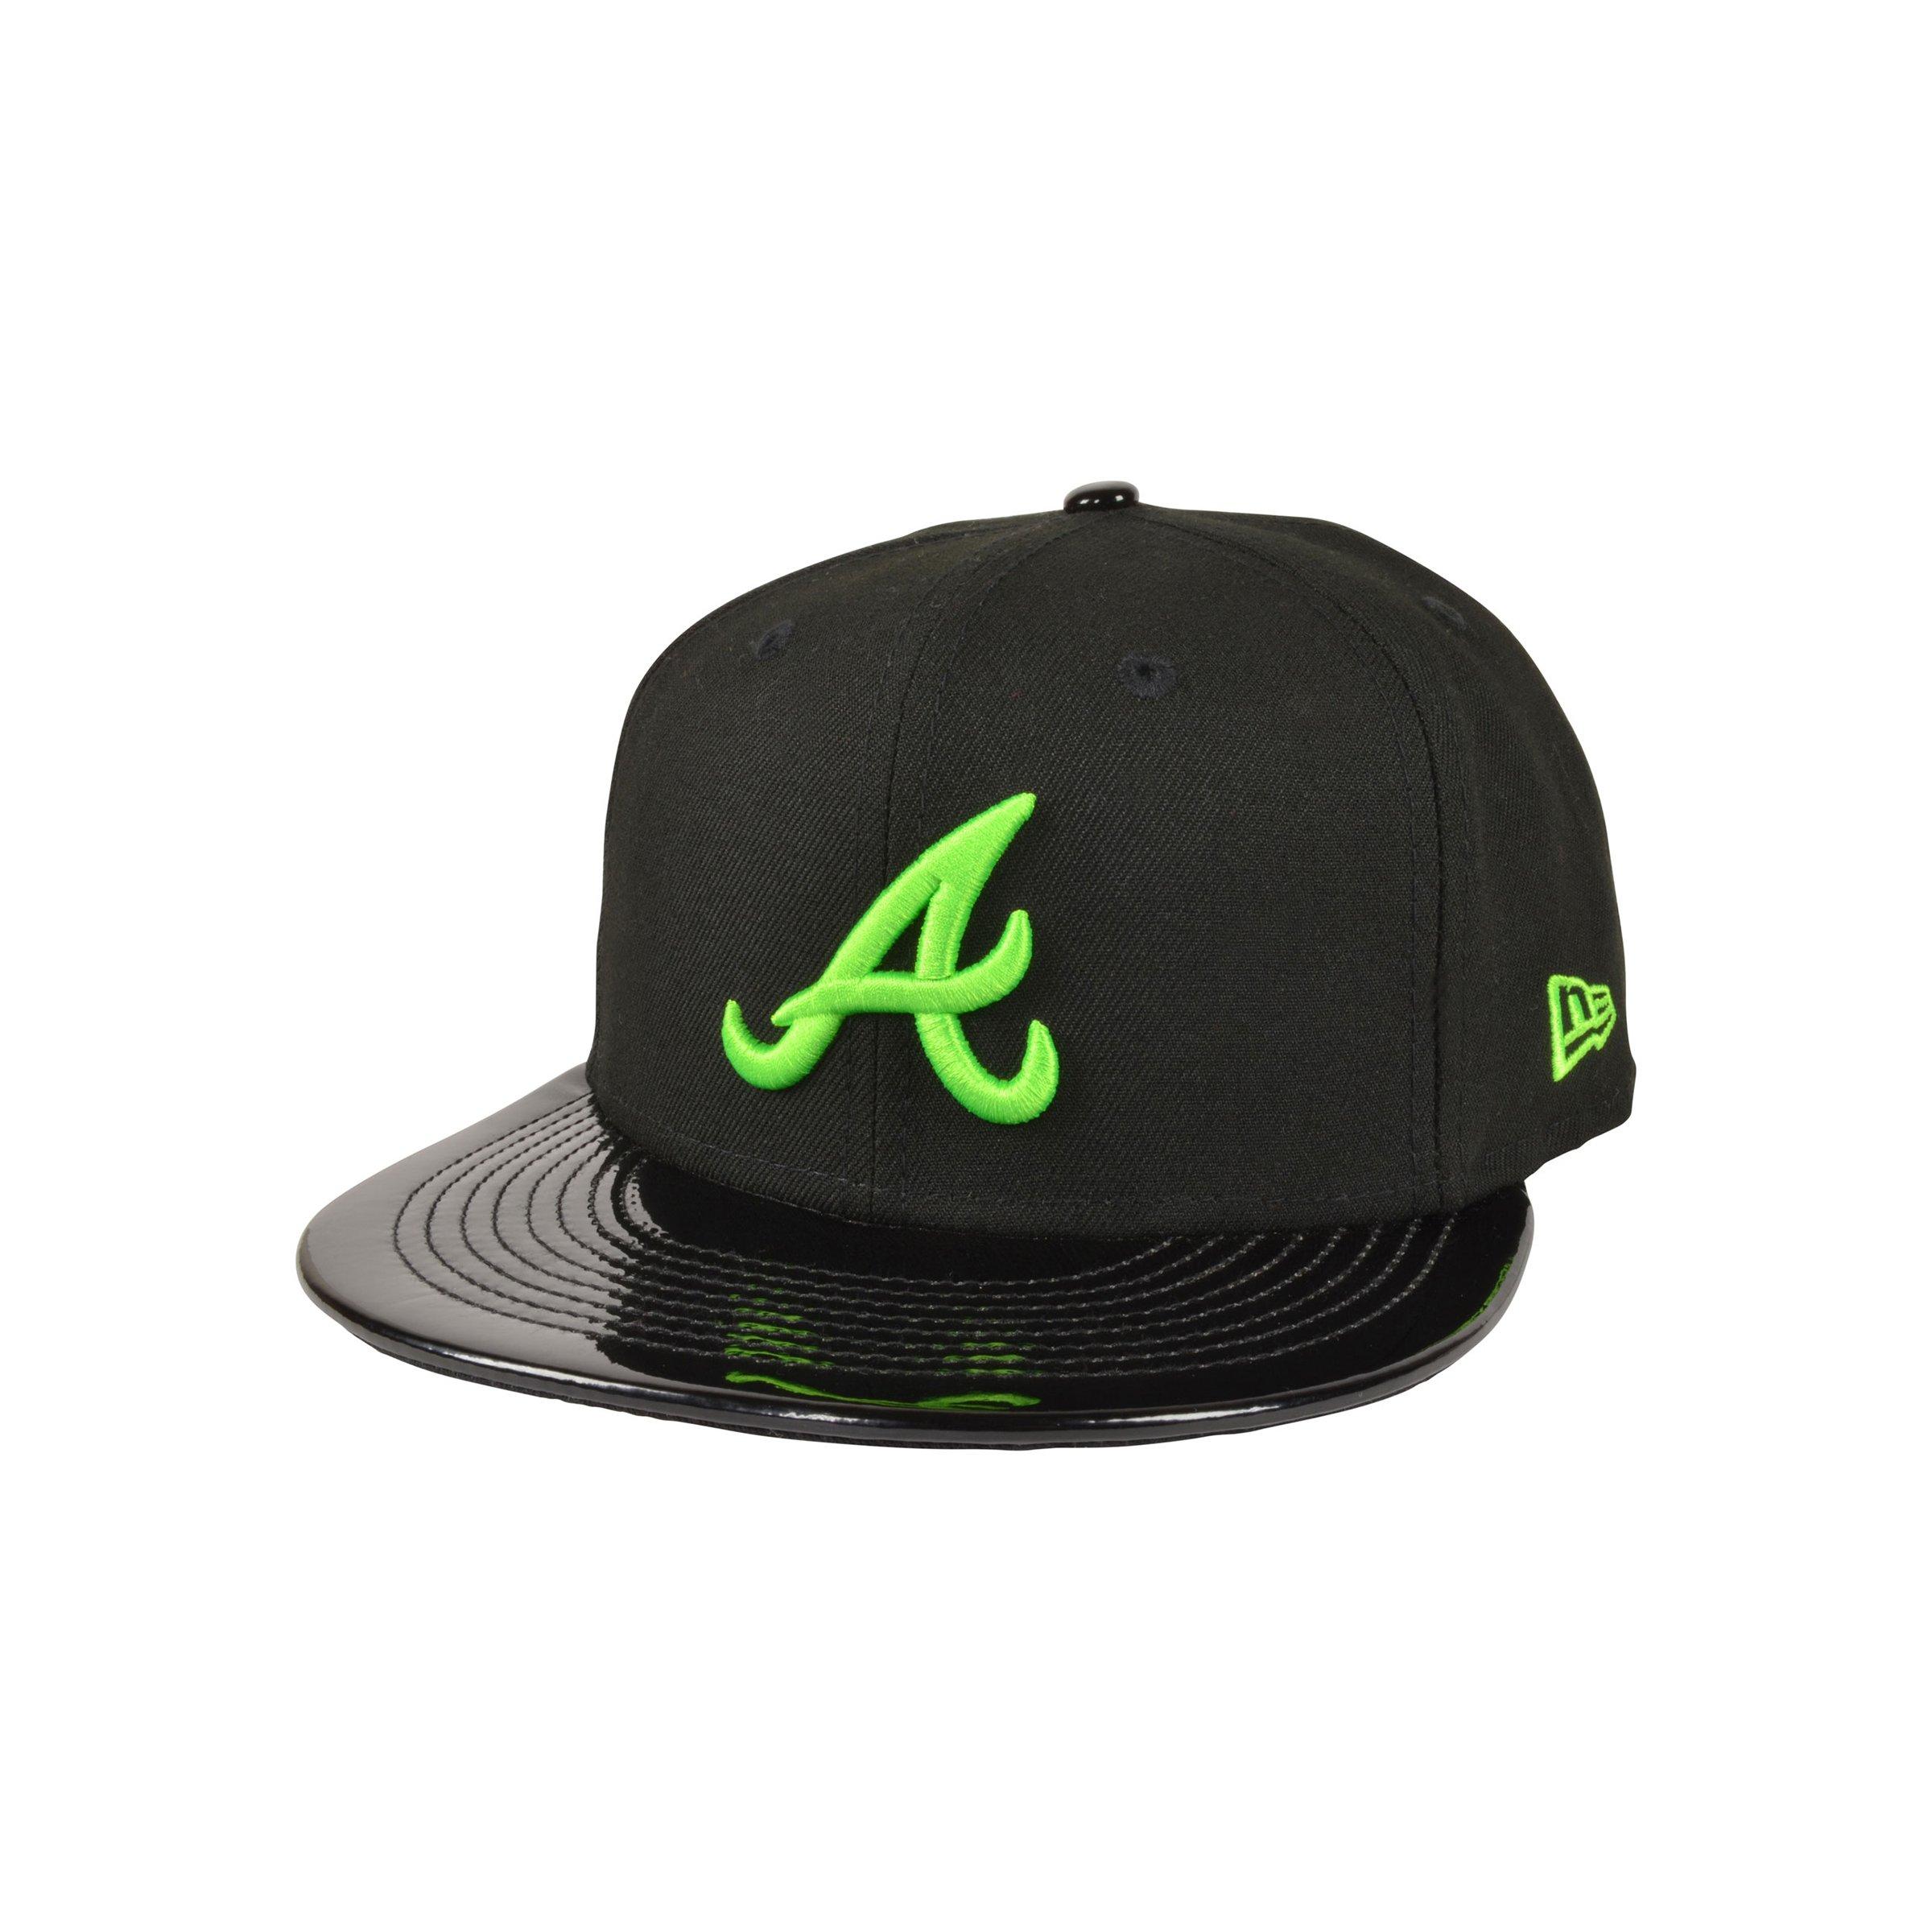 lime green braves jersey